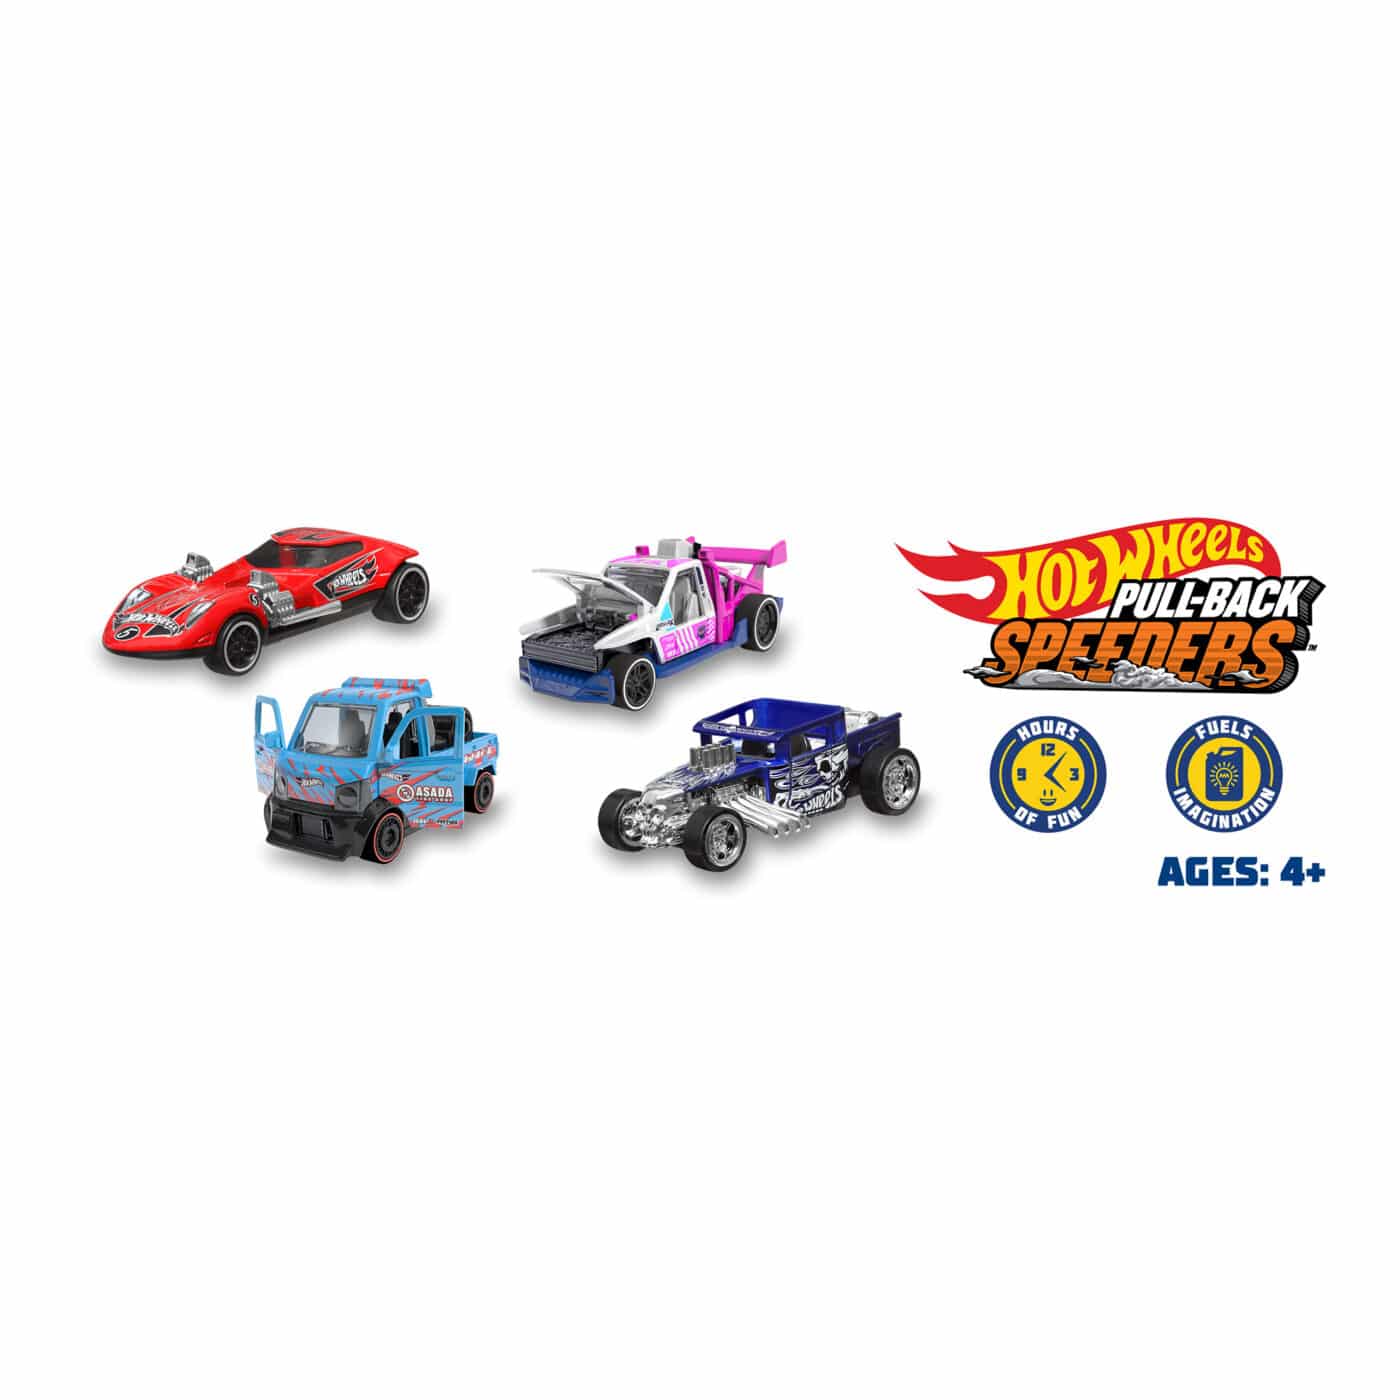 Hot Wheels Pull-Back Speeders in 143 Scale - Assorted